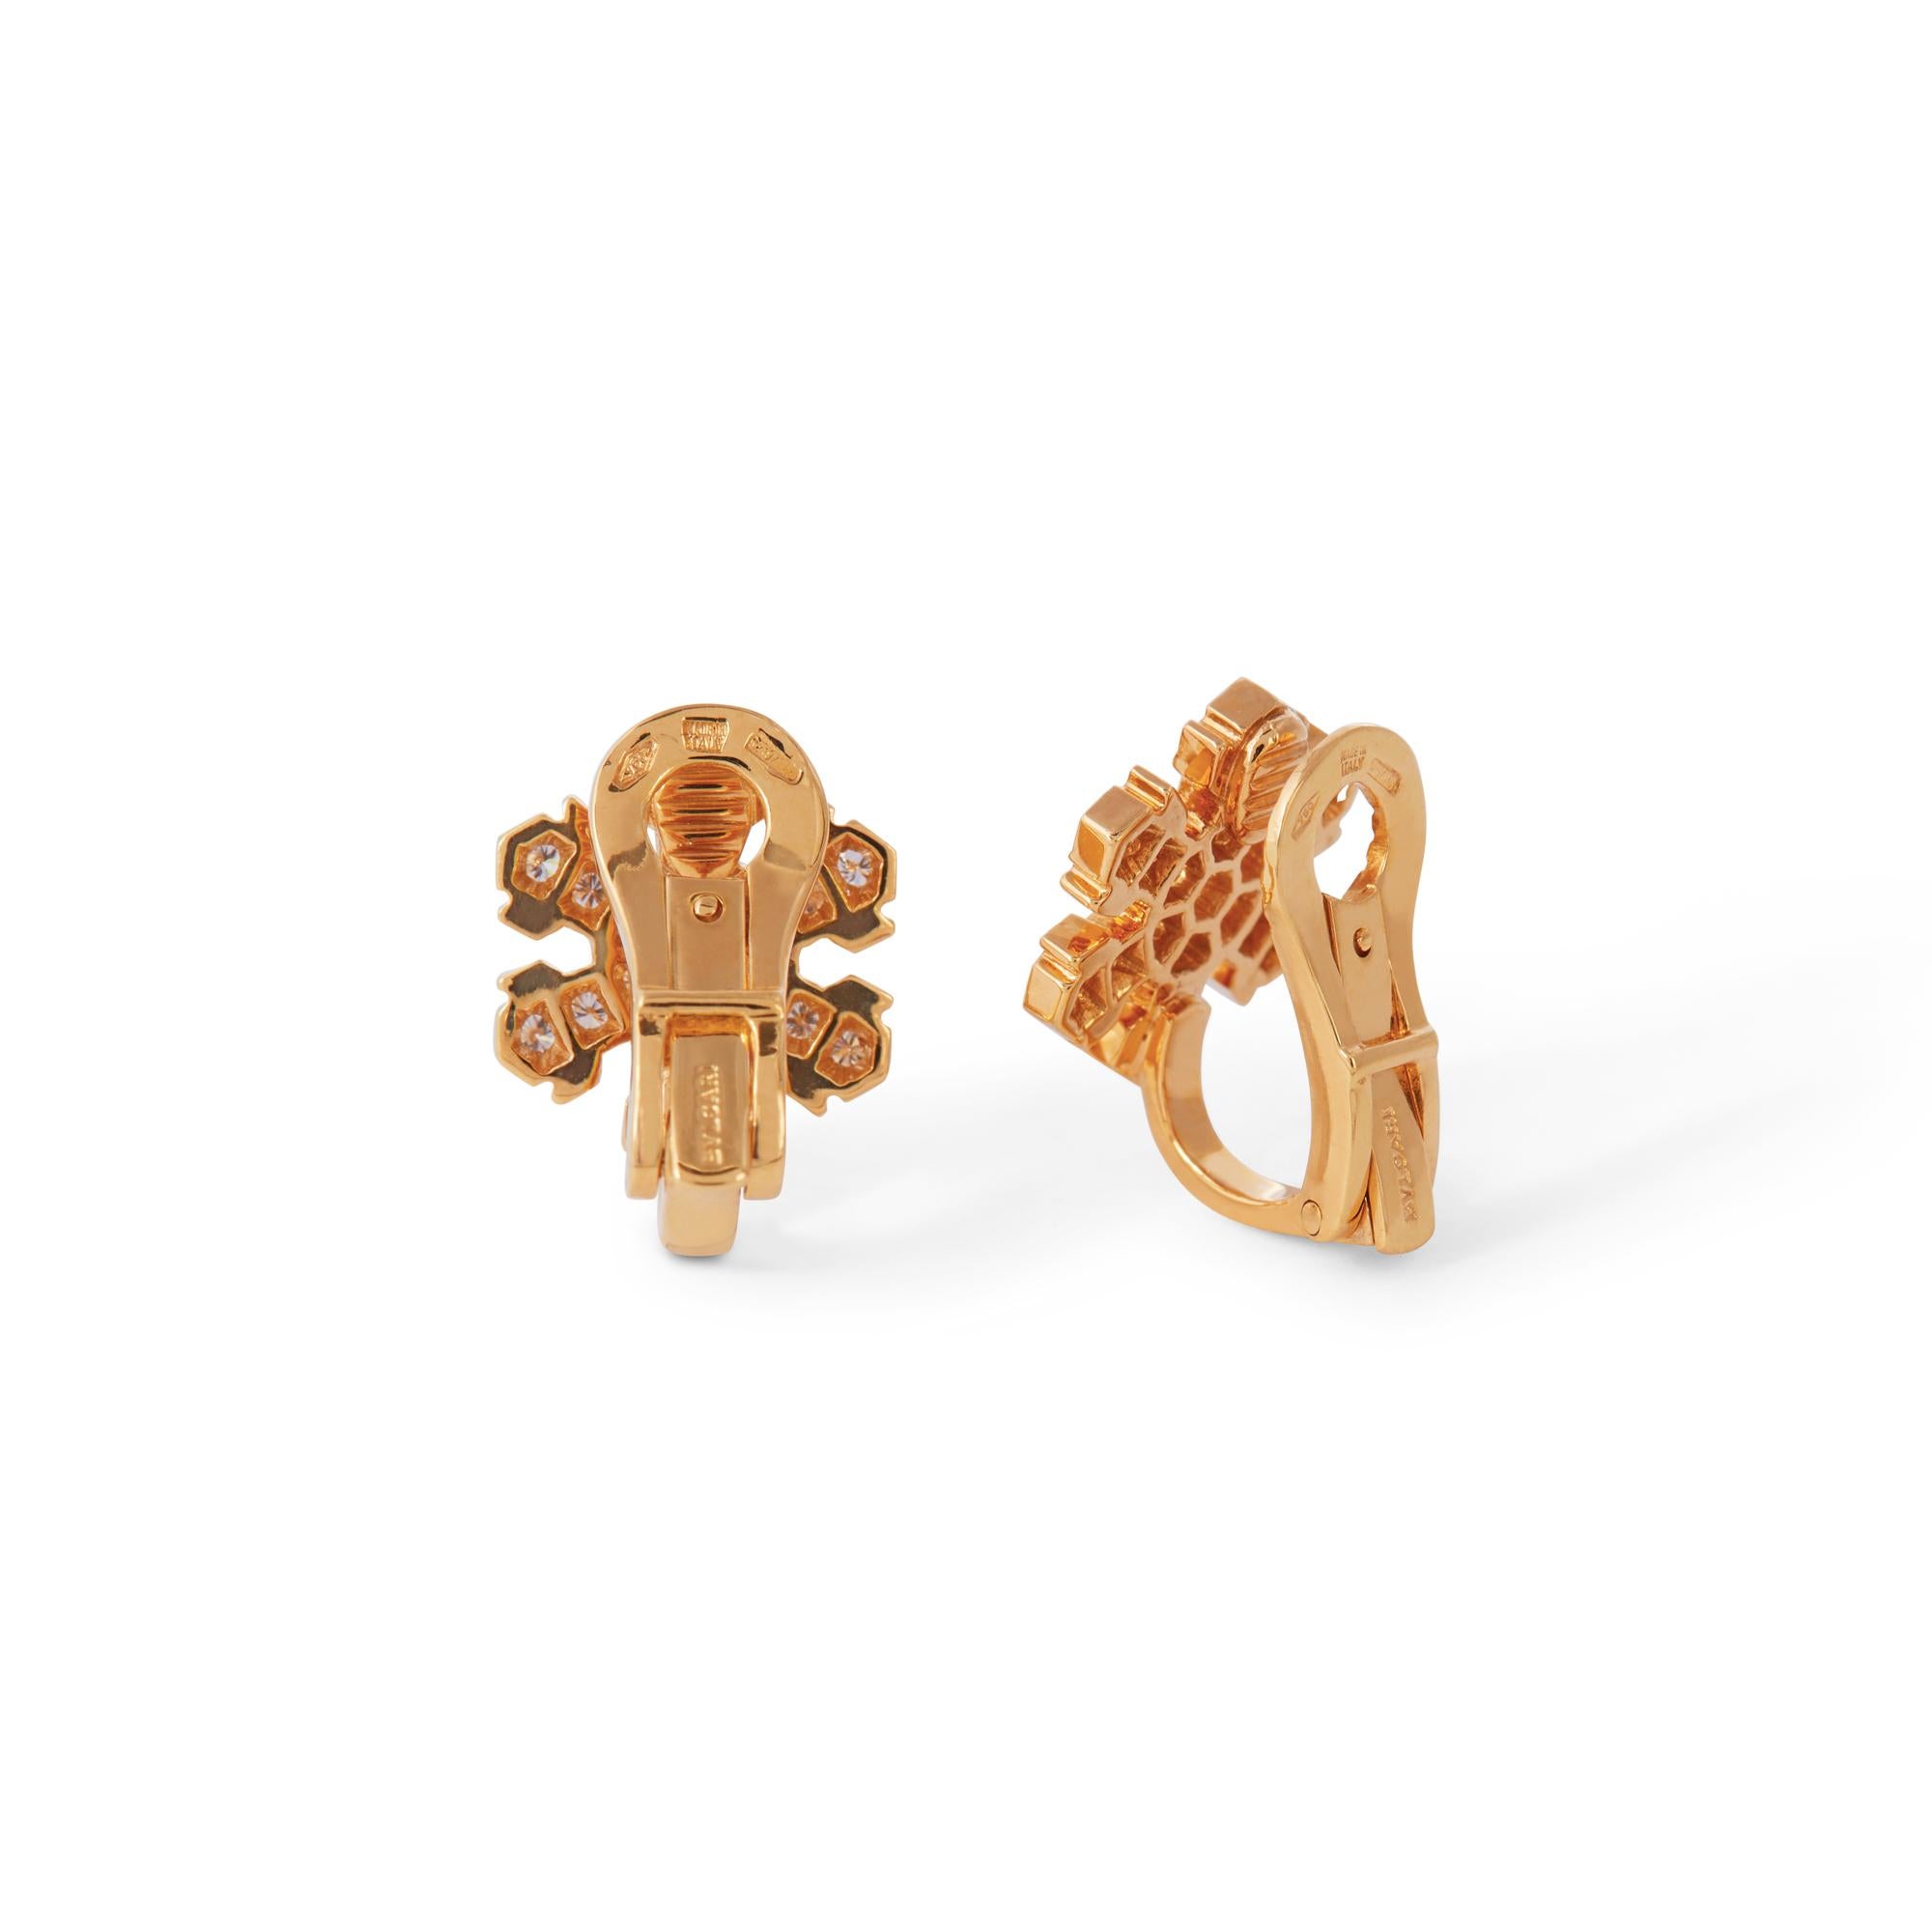 Authentic Bvlgari earrings crafted in 18 karat yellow gold.  The snowflake-shaped earrings are set with round brilliant cut diamonds for an estimated .50 carats total weight.  The earrings measure 14mm in length and 12.1mm wide with clip backs for